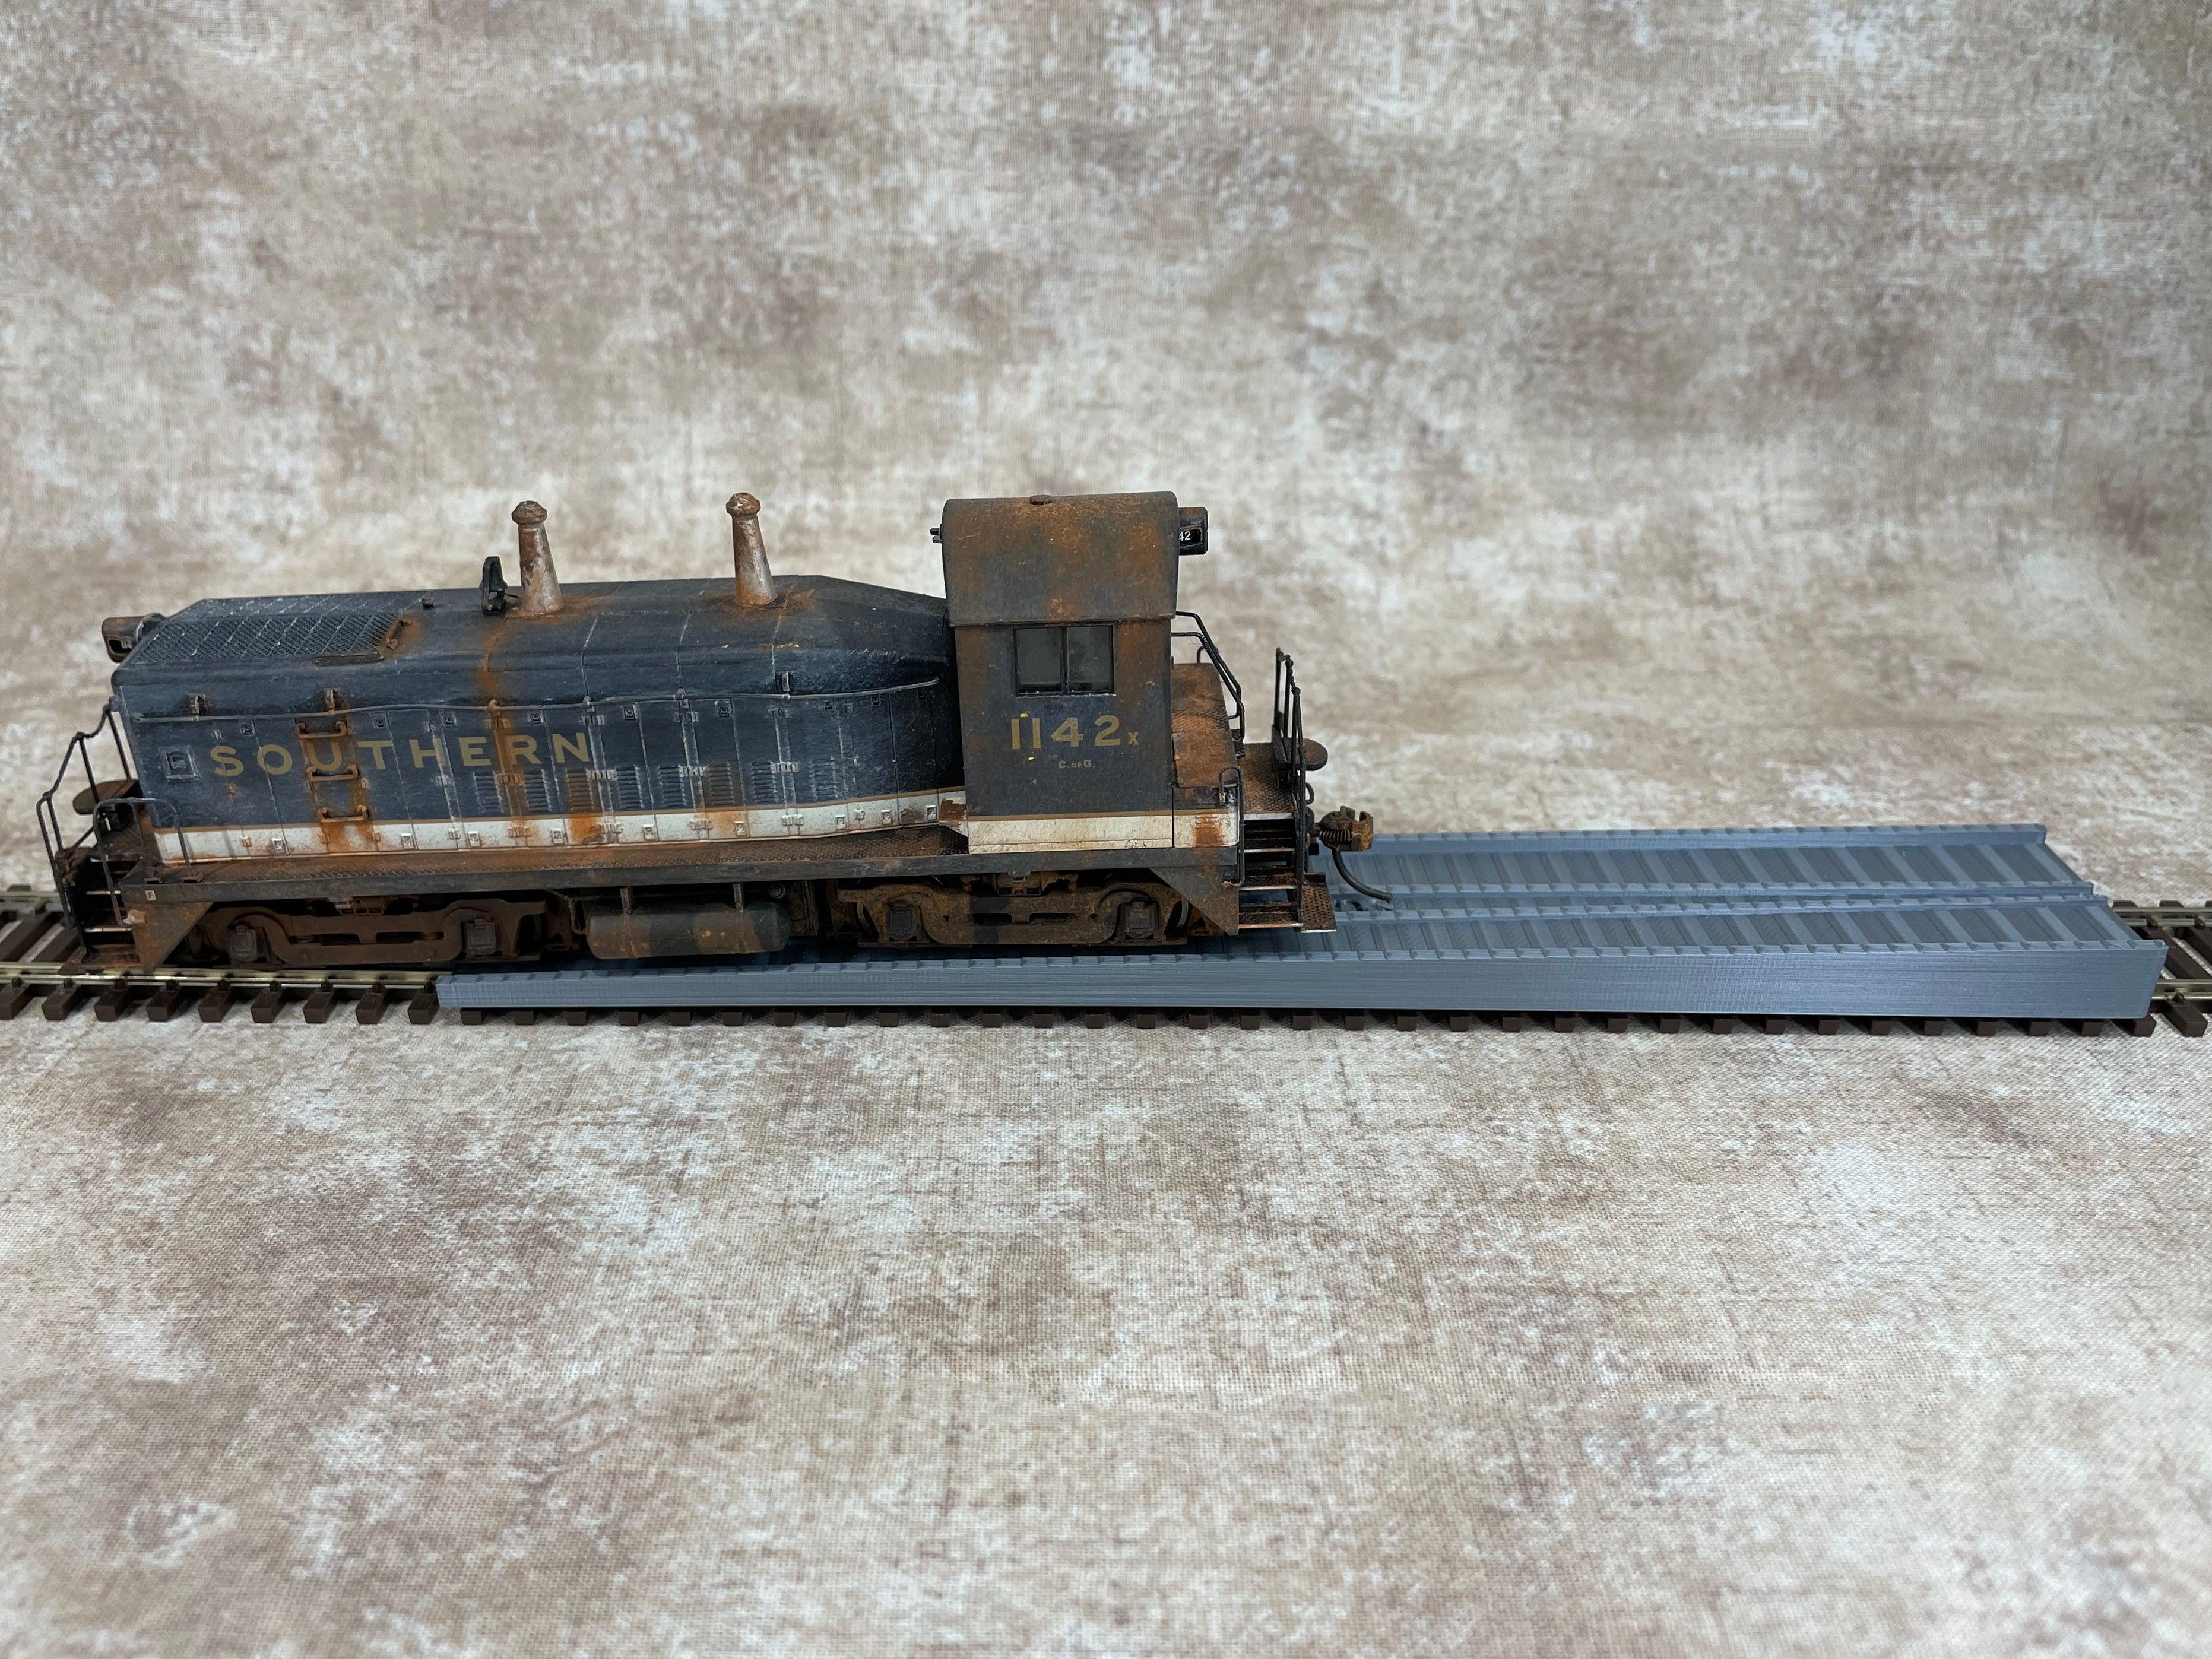 Squeaky's Trains #43 | HO Scale Rerailer | 2 Pack